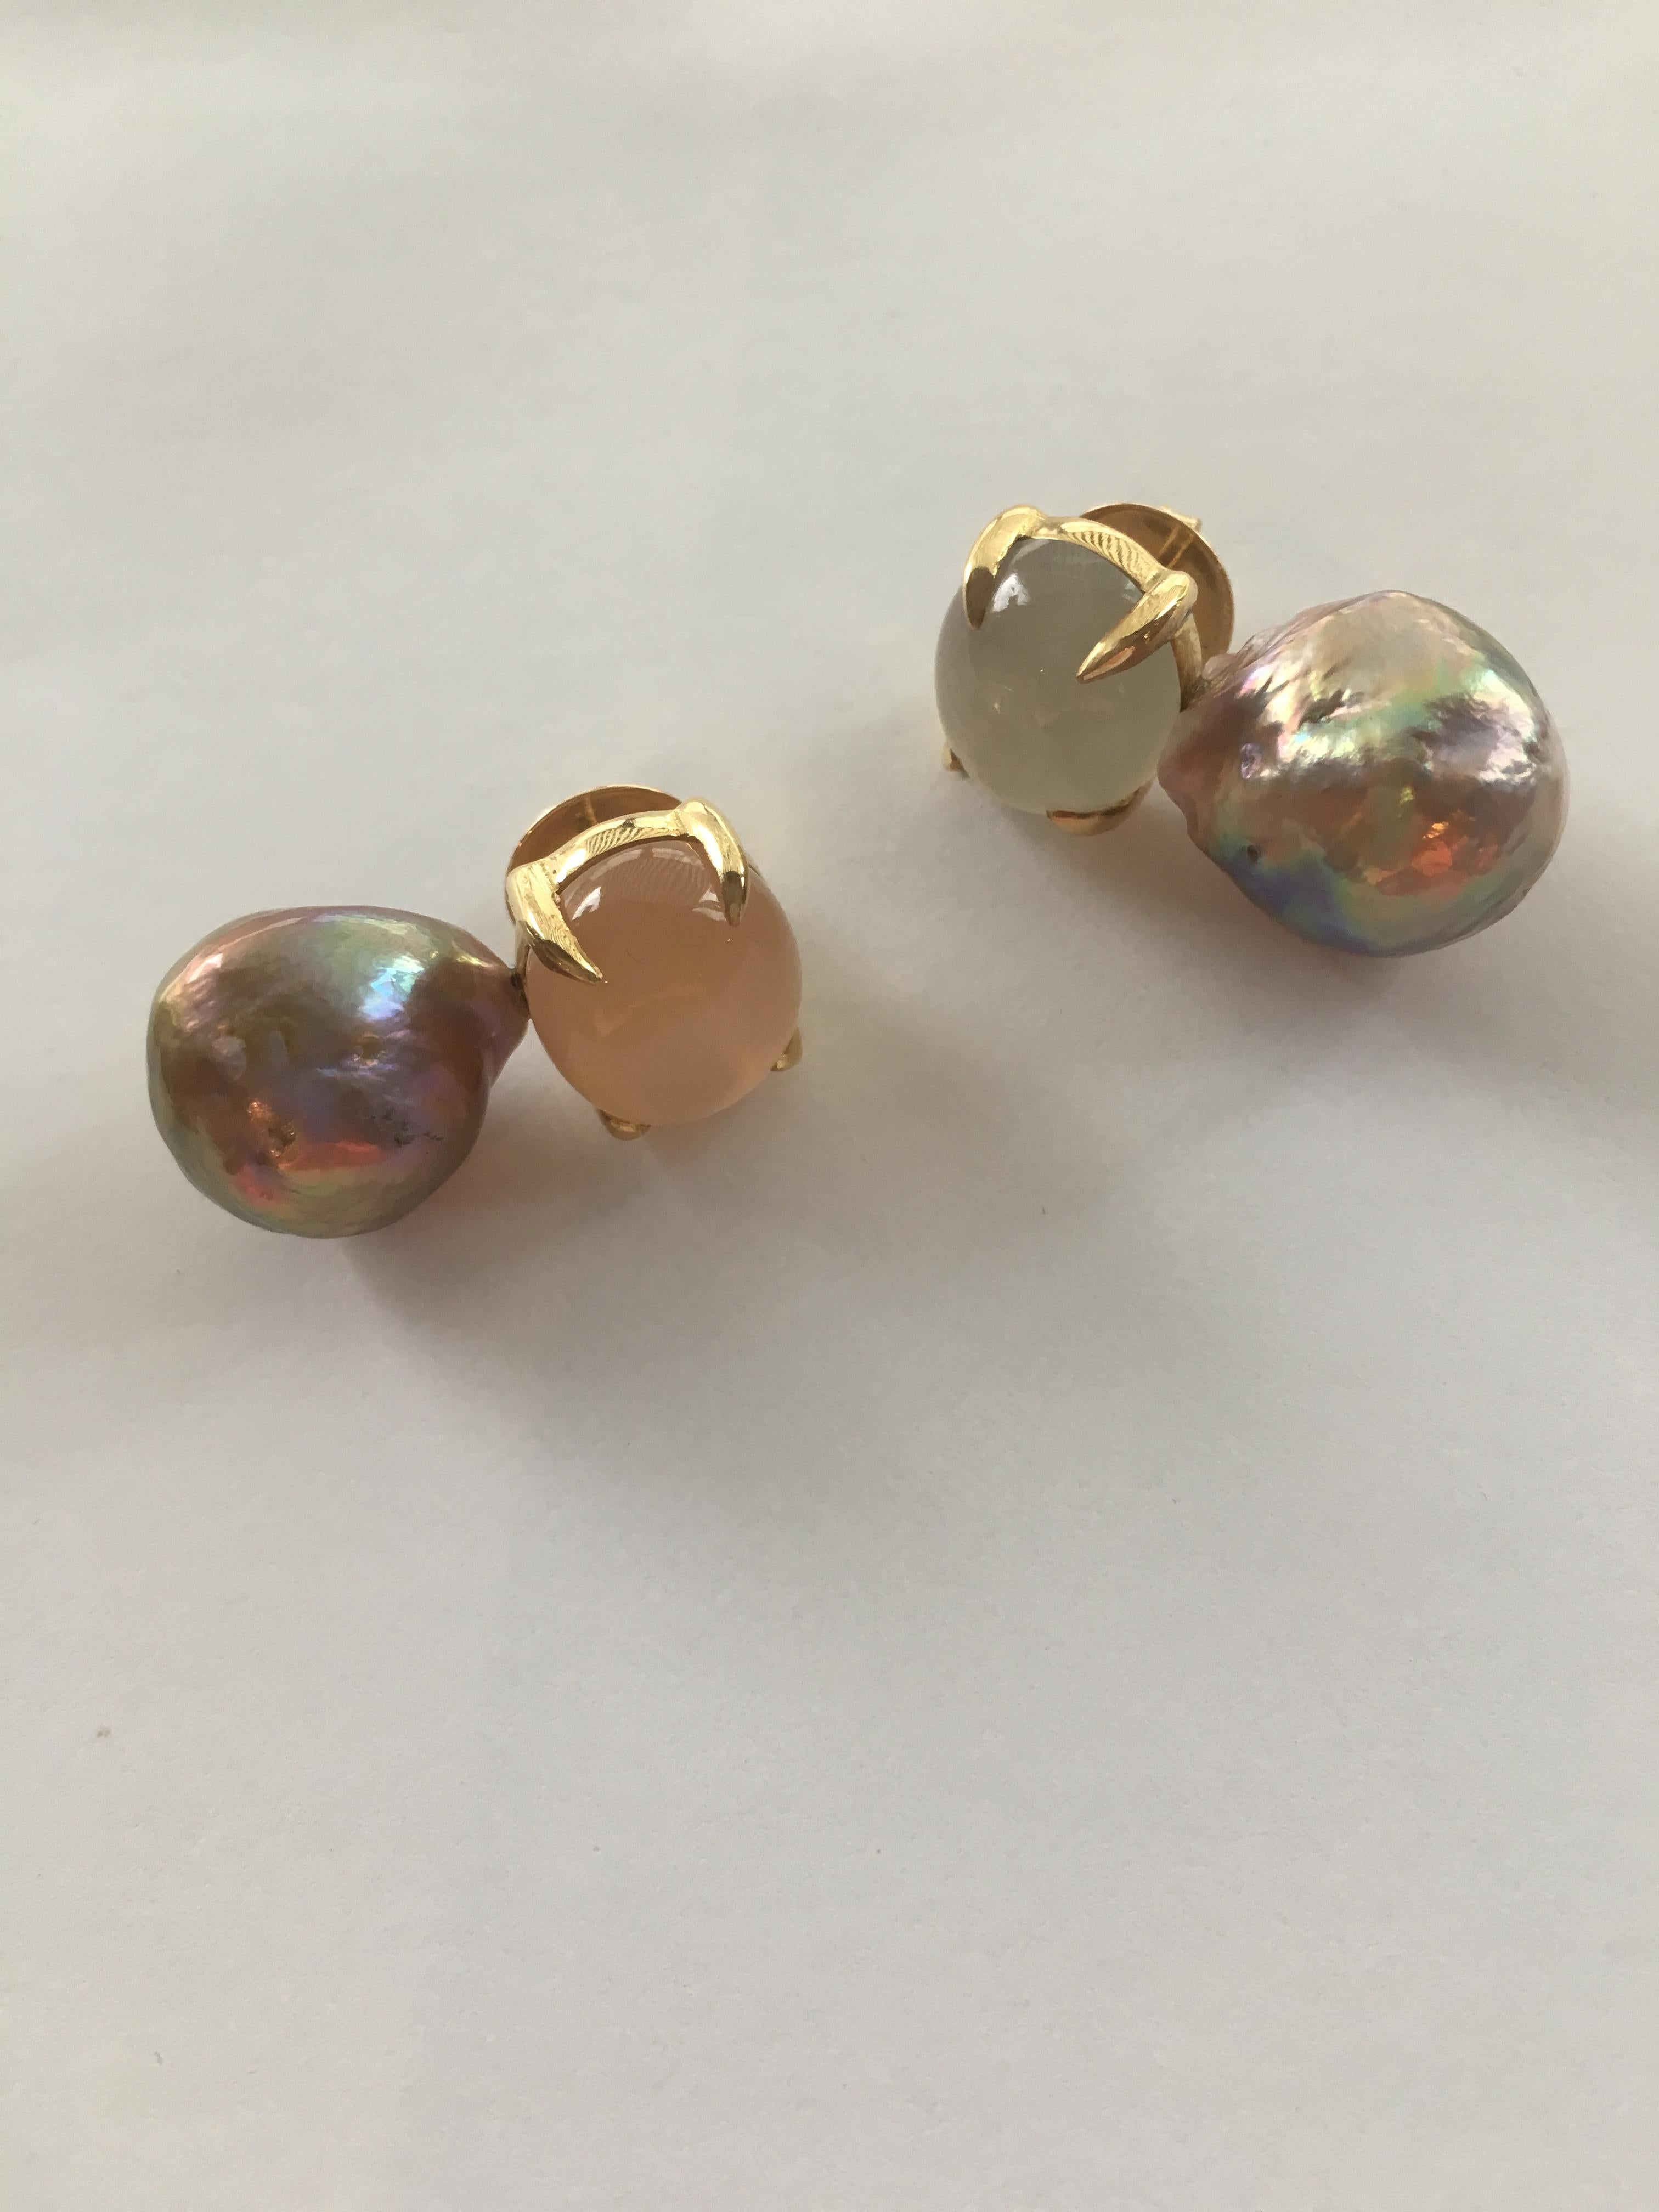 A pair of striking moonstone and ming freshwater pearl earrings. They are paired with metallic iridescent baroque freshwater pearls and set in 18 karat yellow gold.   Having the moonstones in different colour makes them interesting and unique